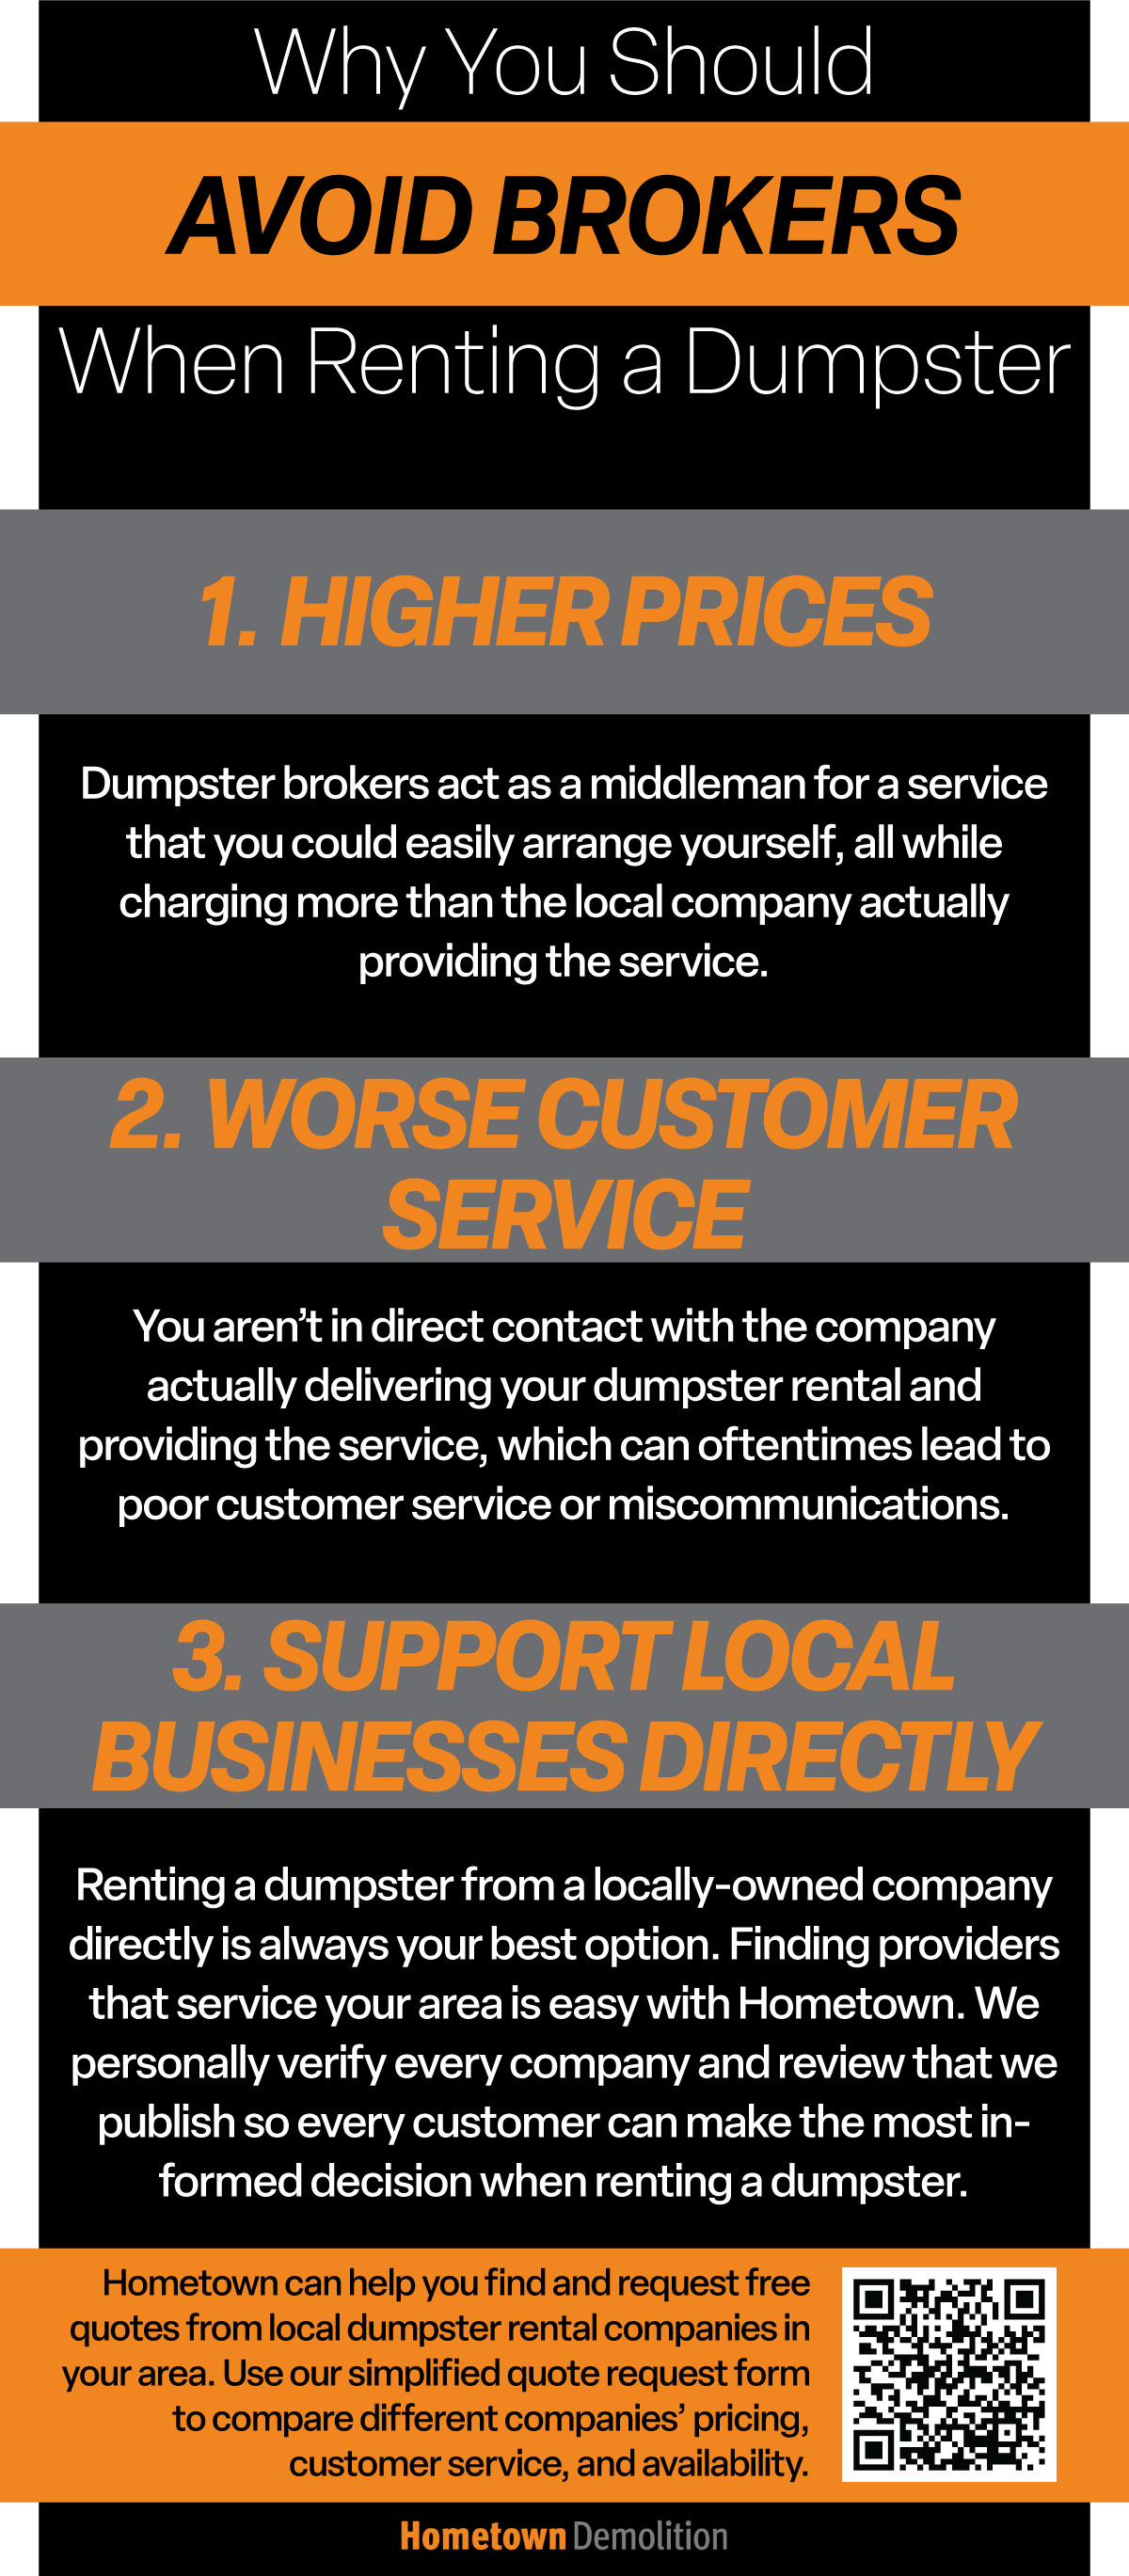 Why You Should Avoid Dumpster Brokers When Renting a Dumpster Infographic